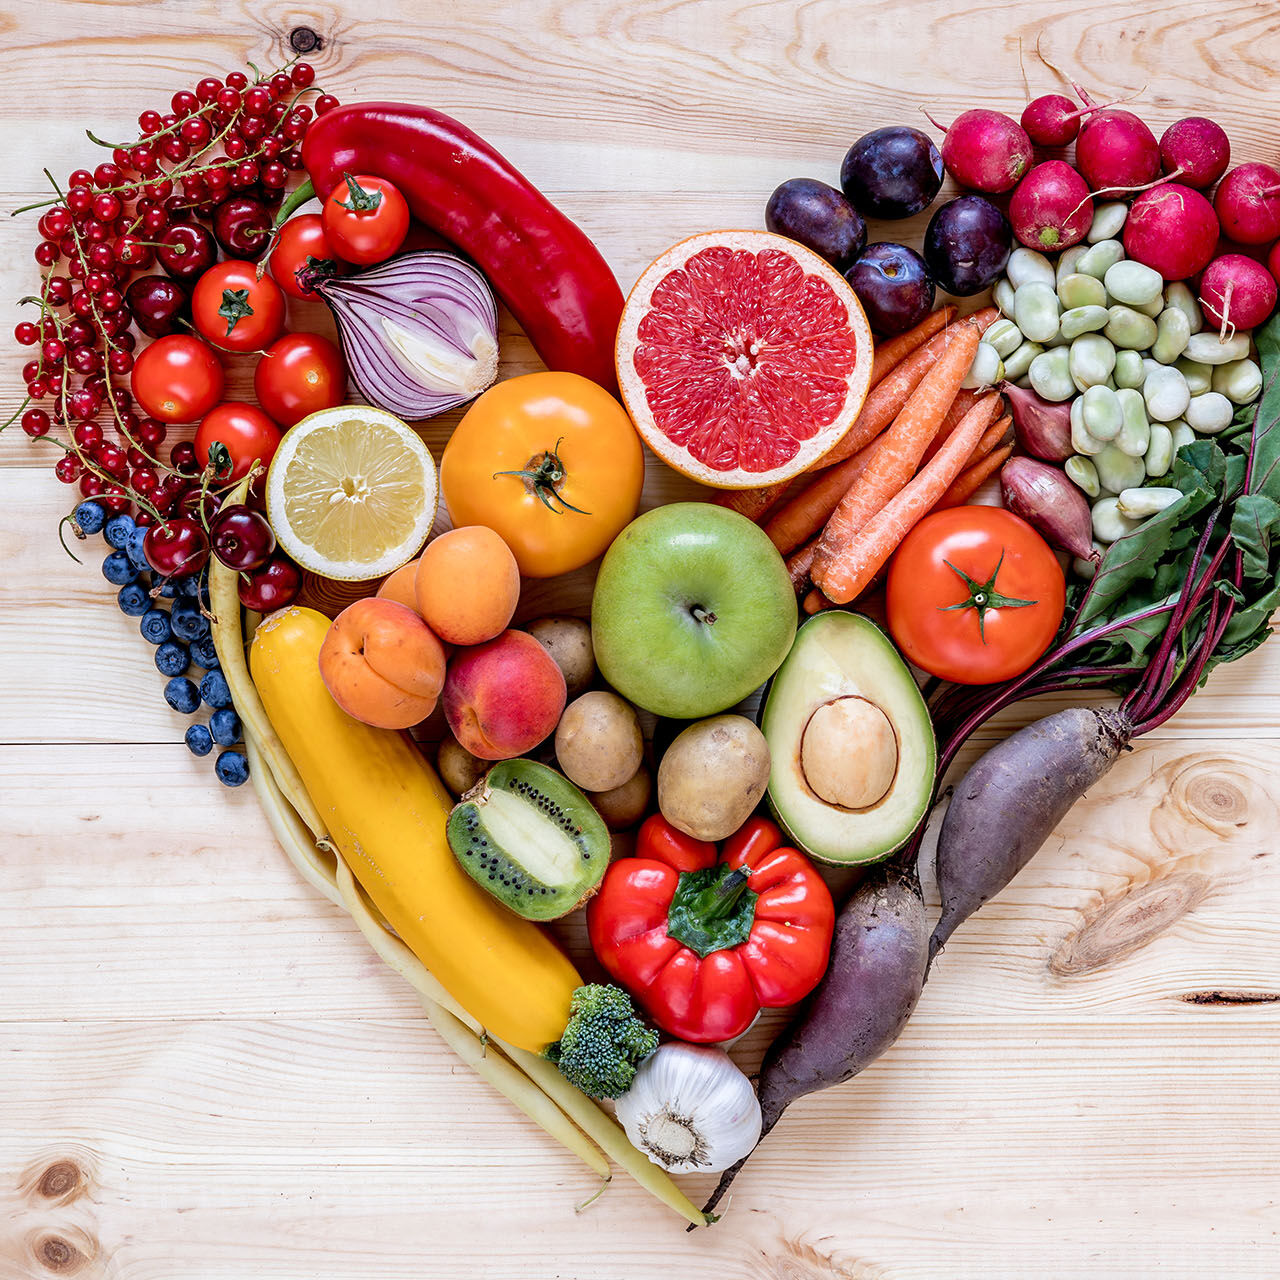 Modern composition of fresh healthy vegetables and fruits in heart shape on the wooden table in the kitchen. Healthy detox and balance diet. Lifestyle. Vegetarian vegan background. Zero waste. Top view.